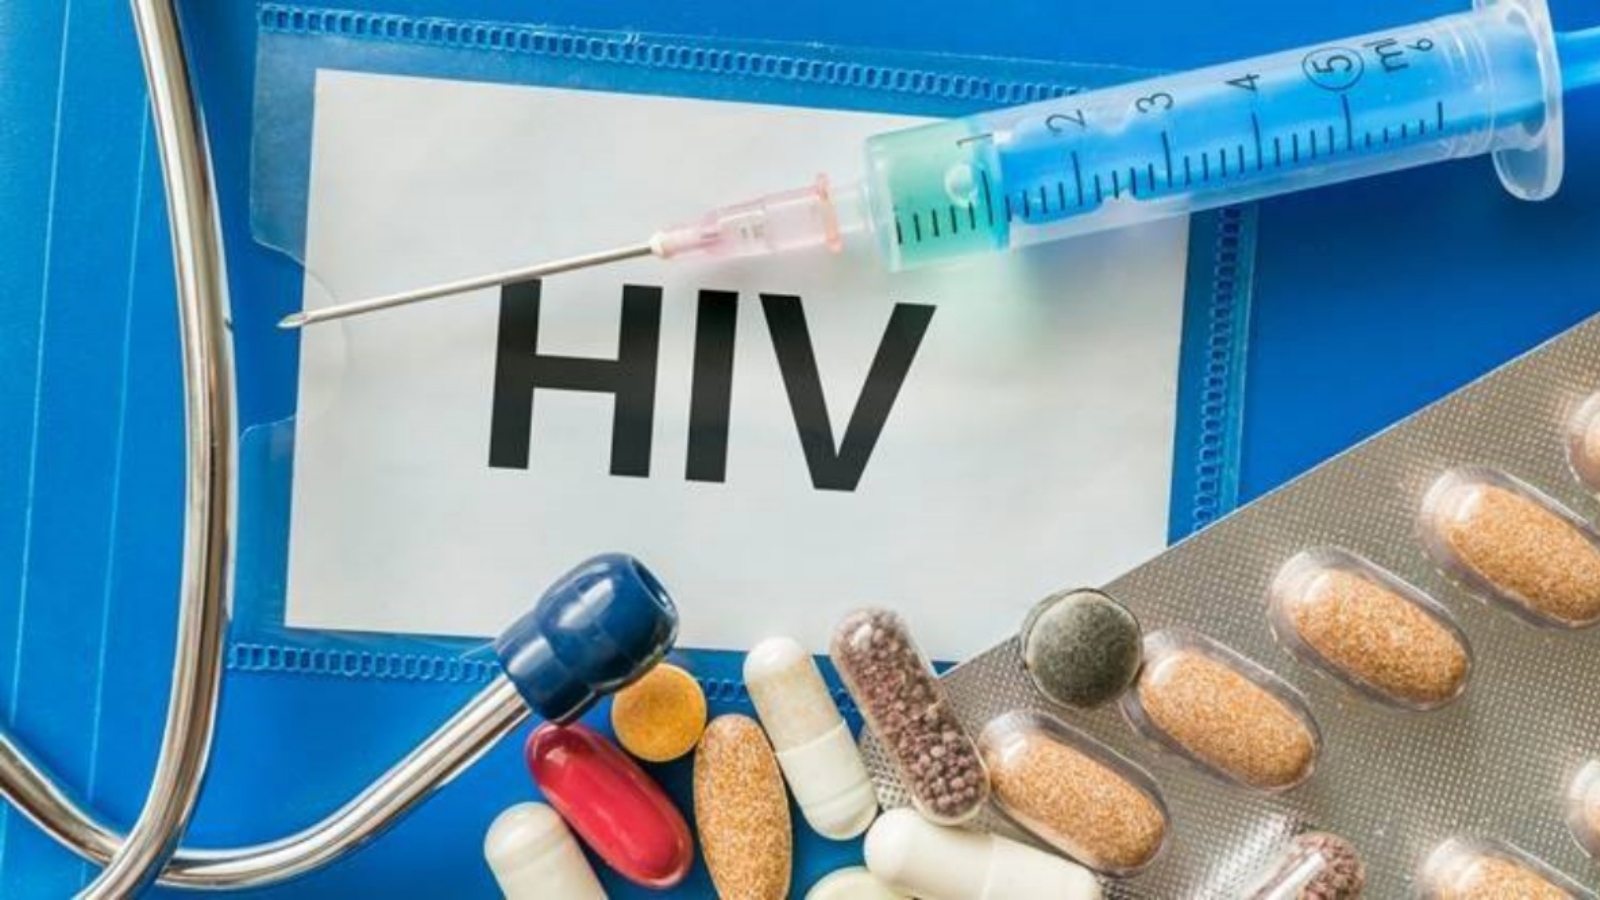 State’s fight against HIV: Increased testing, declining rates - The Indian Express